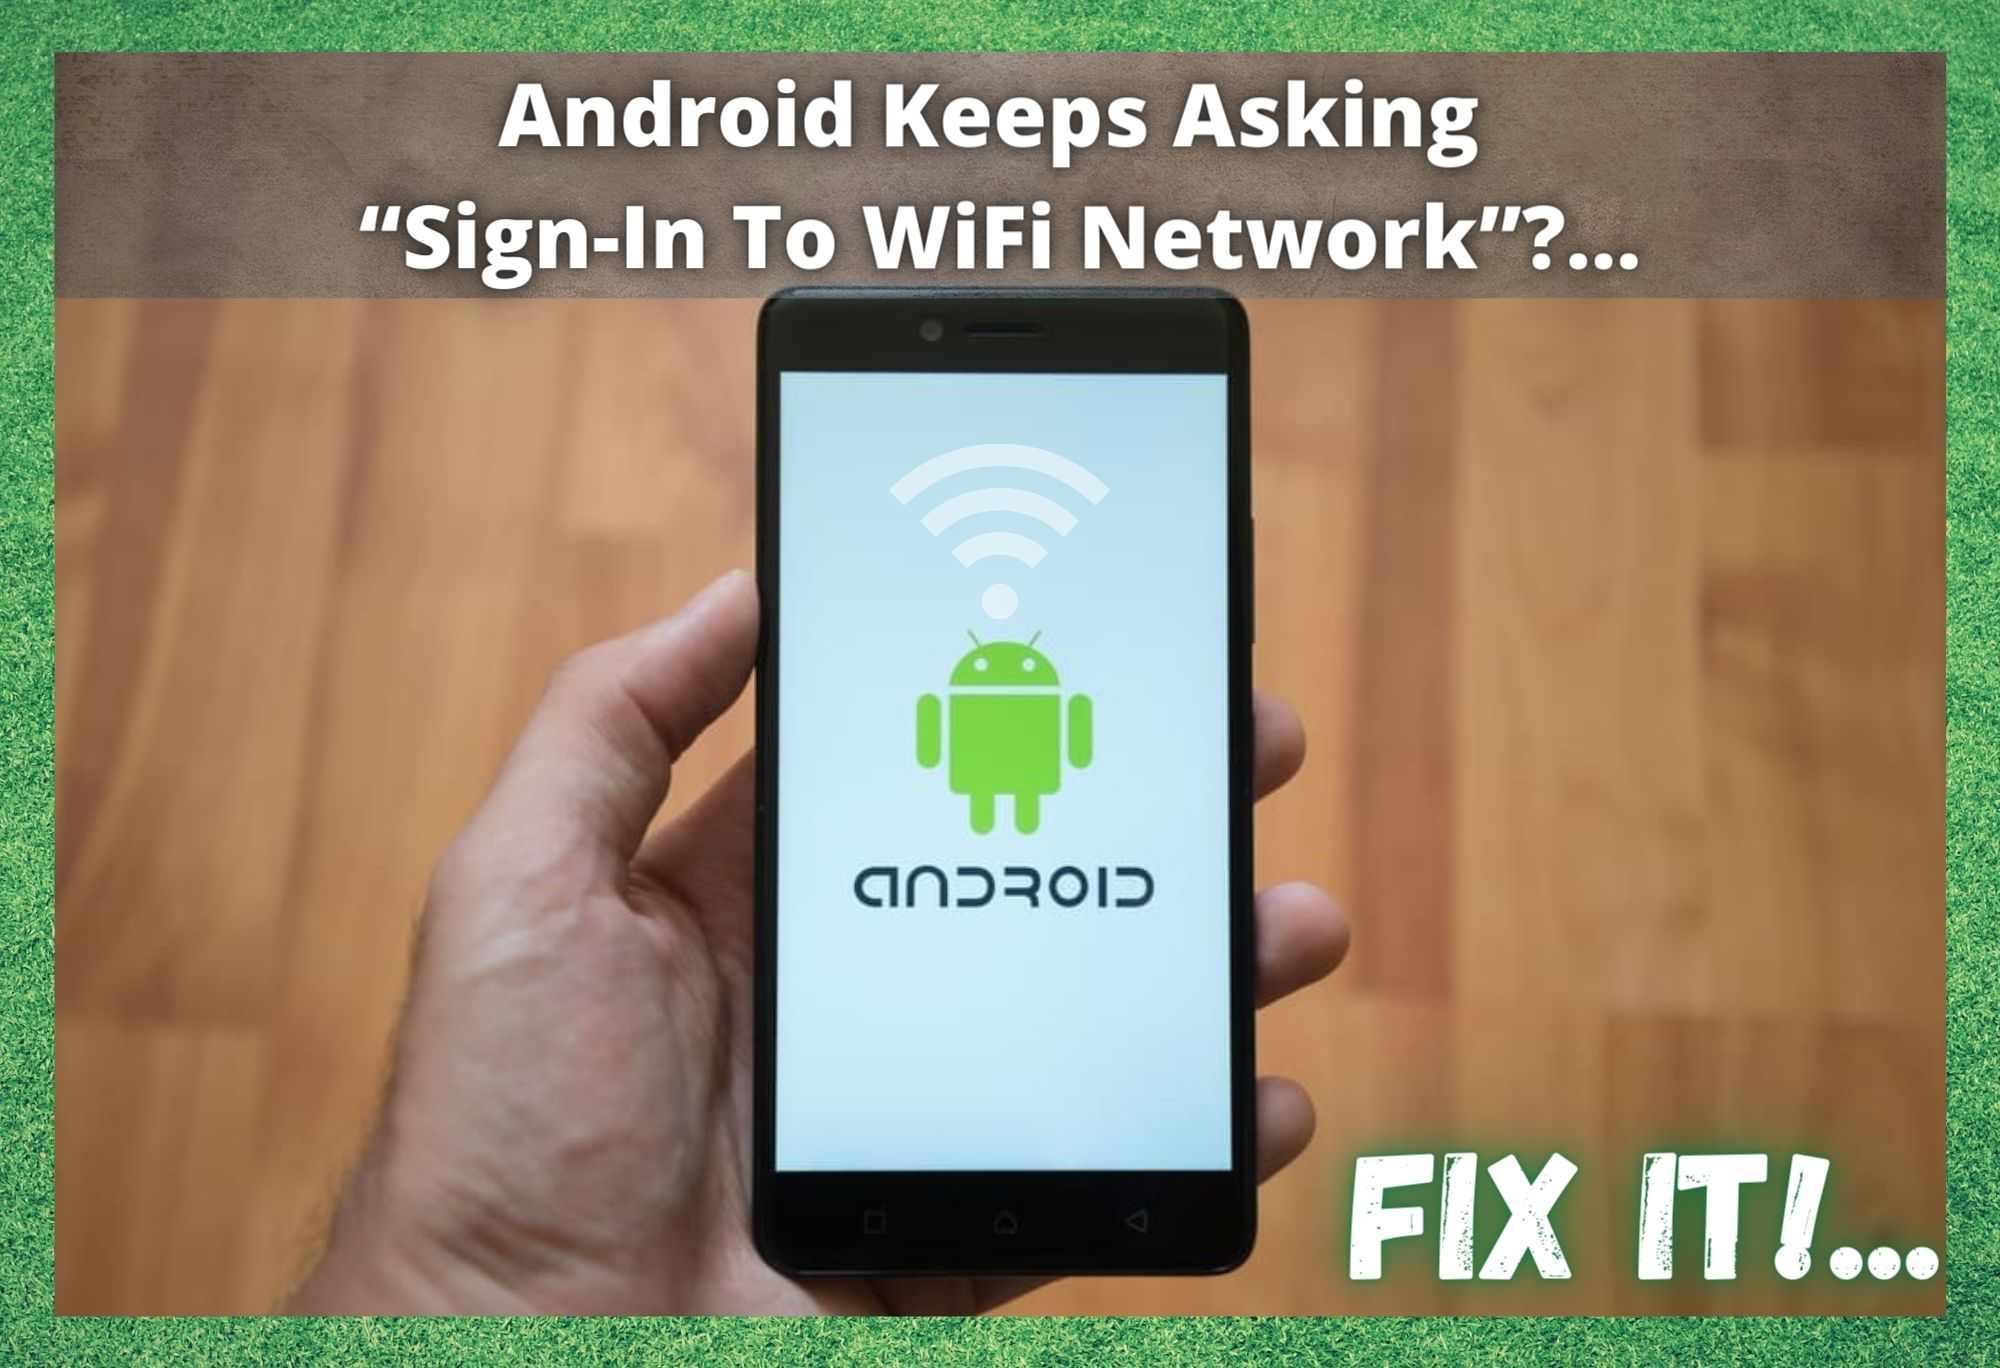 Android Keeps Asking Sign-In To WiFi Network